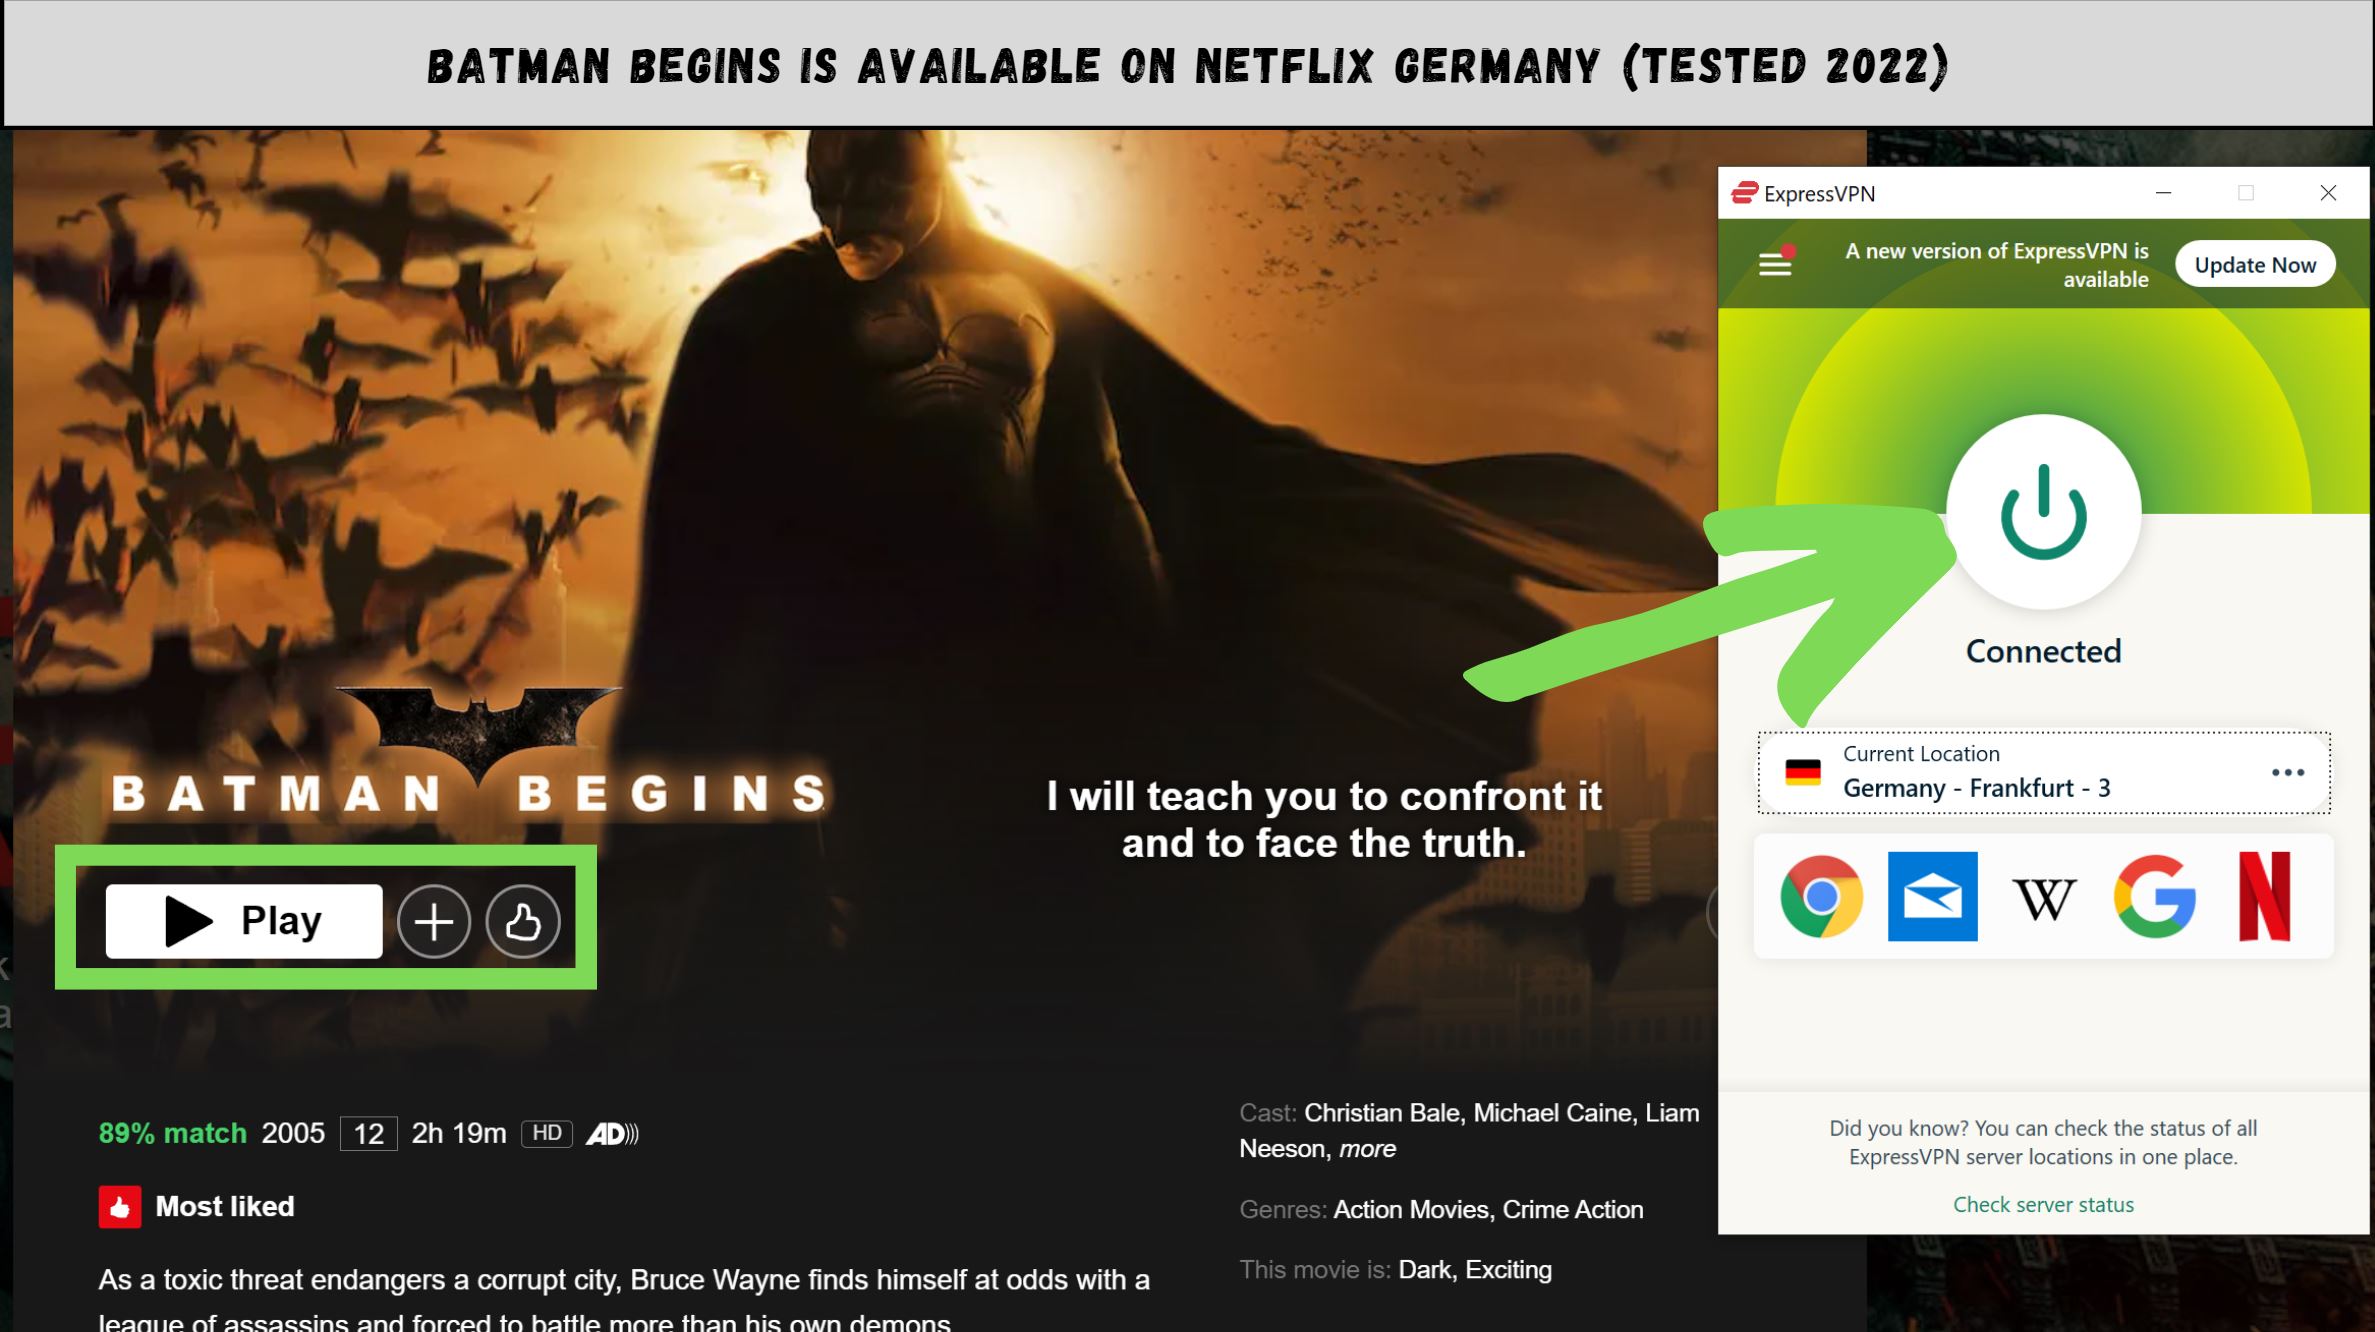 How To Watch The Dark Knight Trilogy On Netflix| Tested 2022